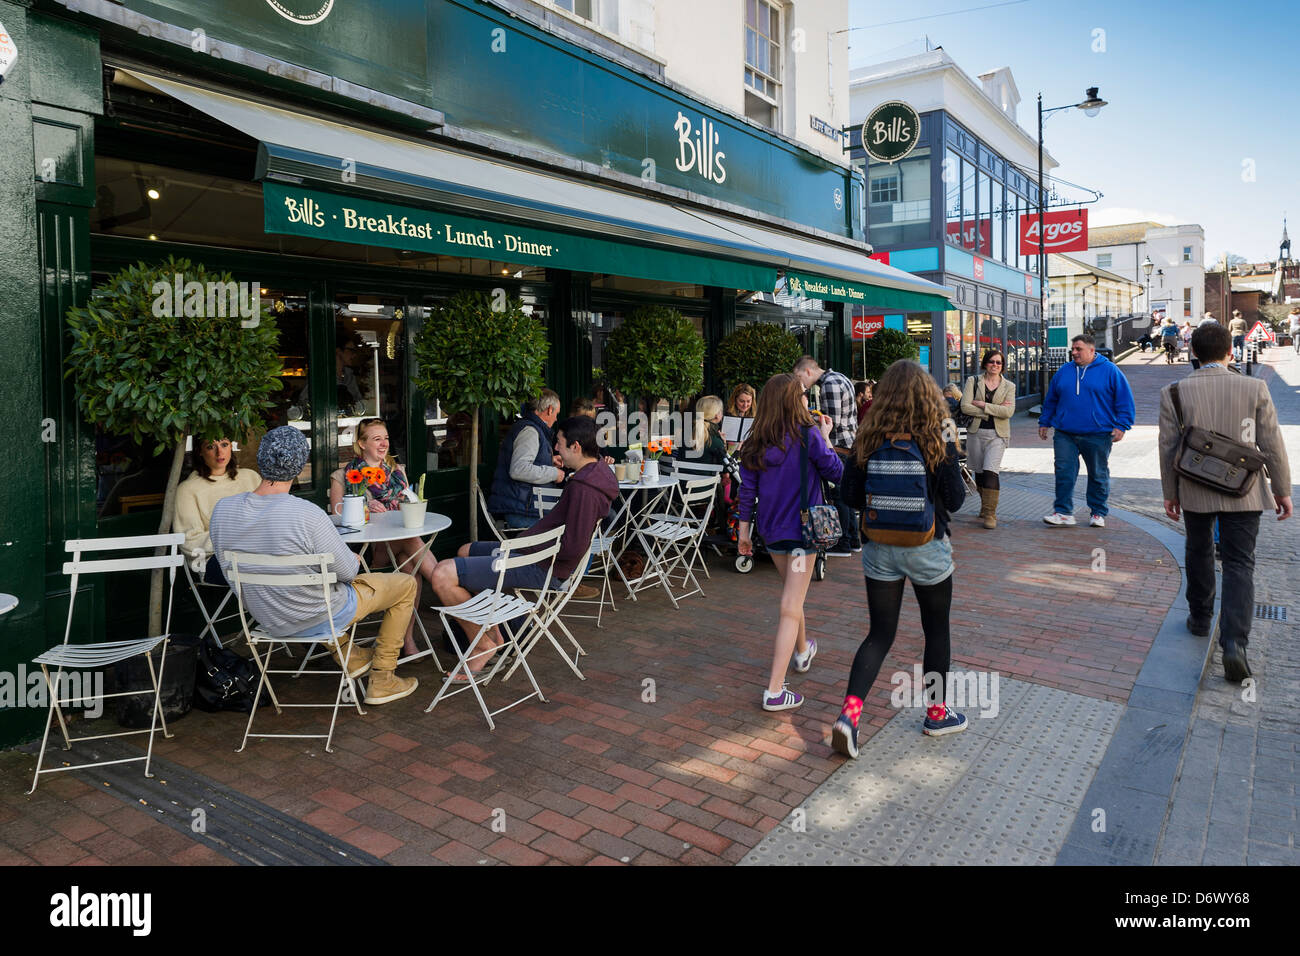 People sitting at tables outside Bills restaurant in Cliffe High Street in Lewes. Stock Photo